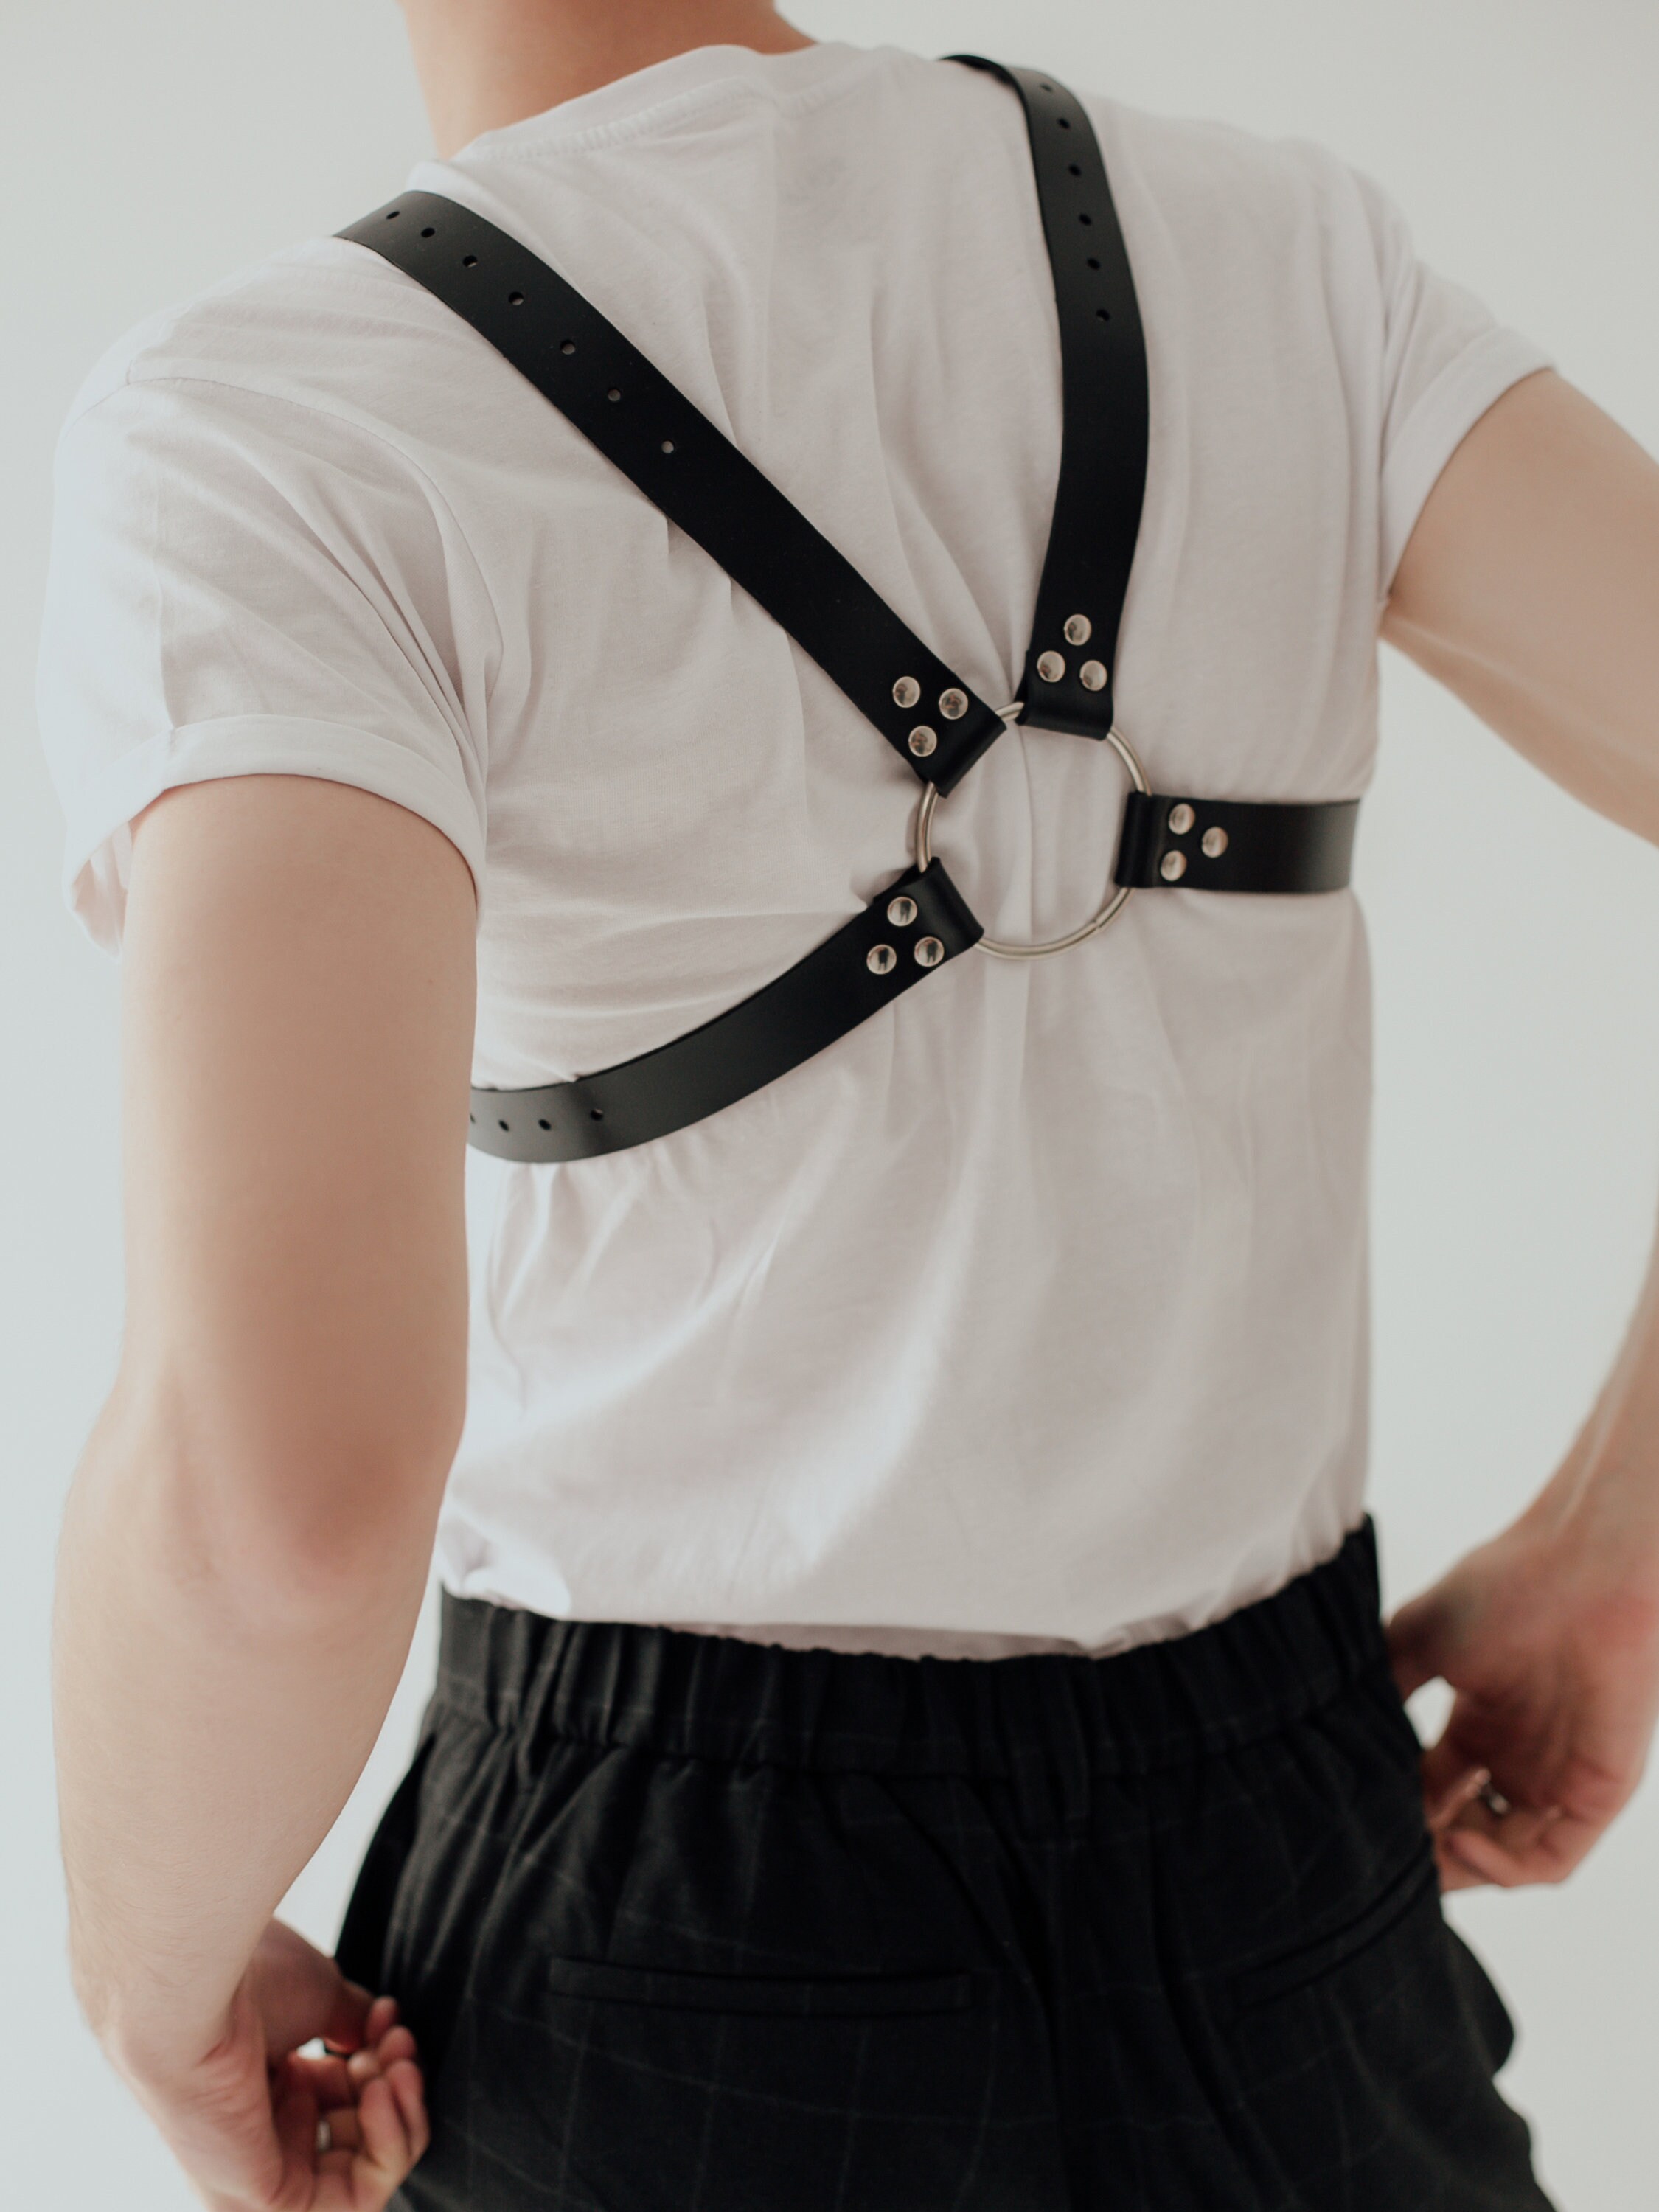 h16) Classic Leather Men's Chest Harness